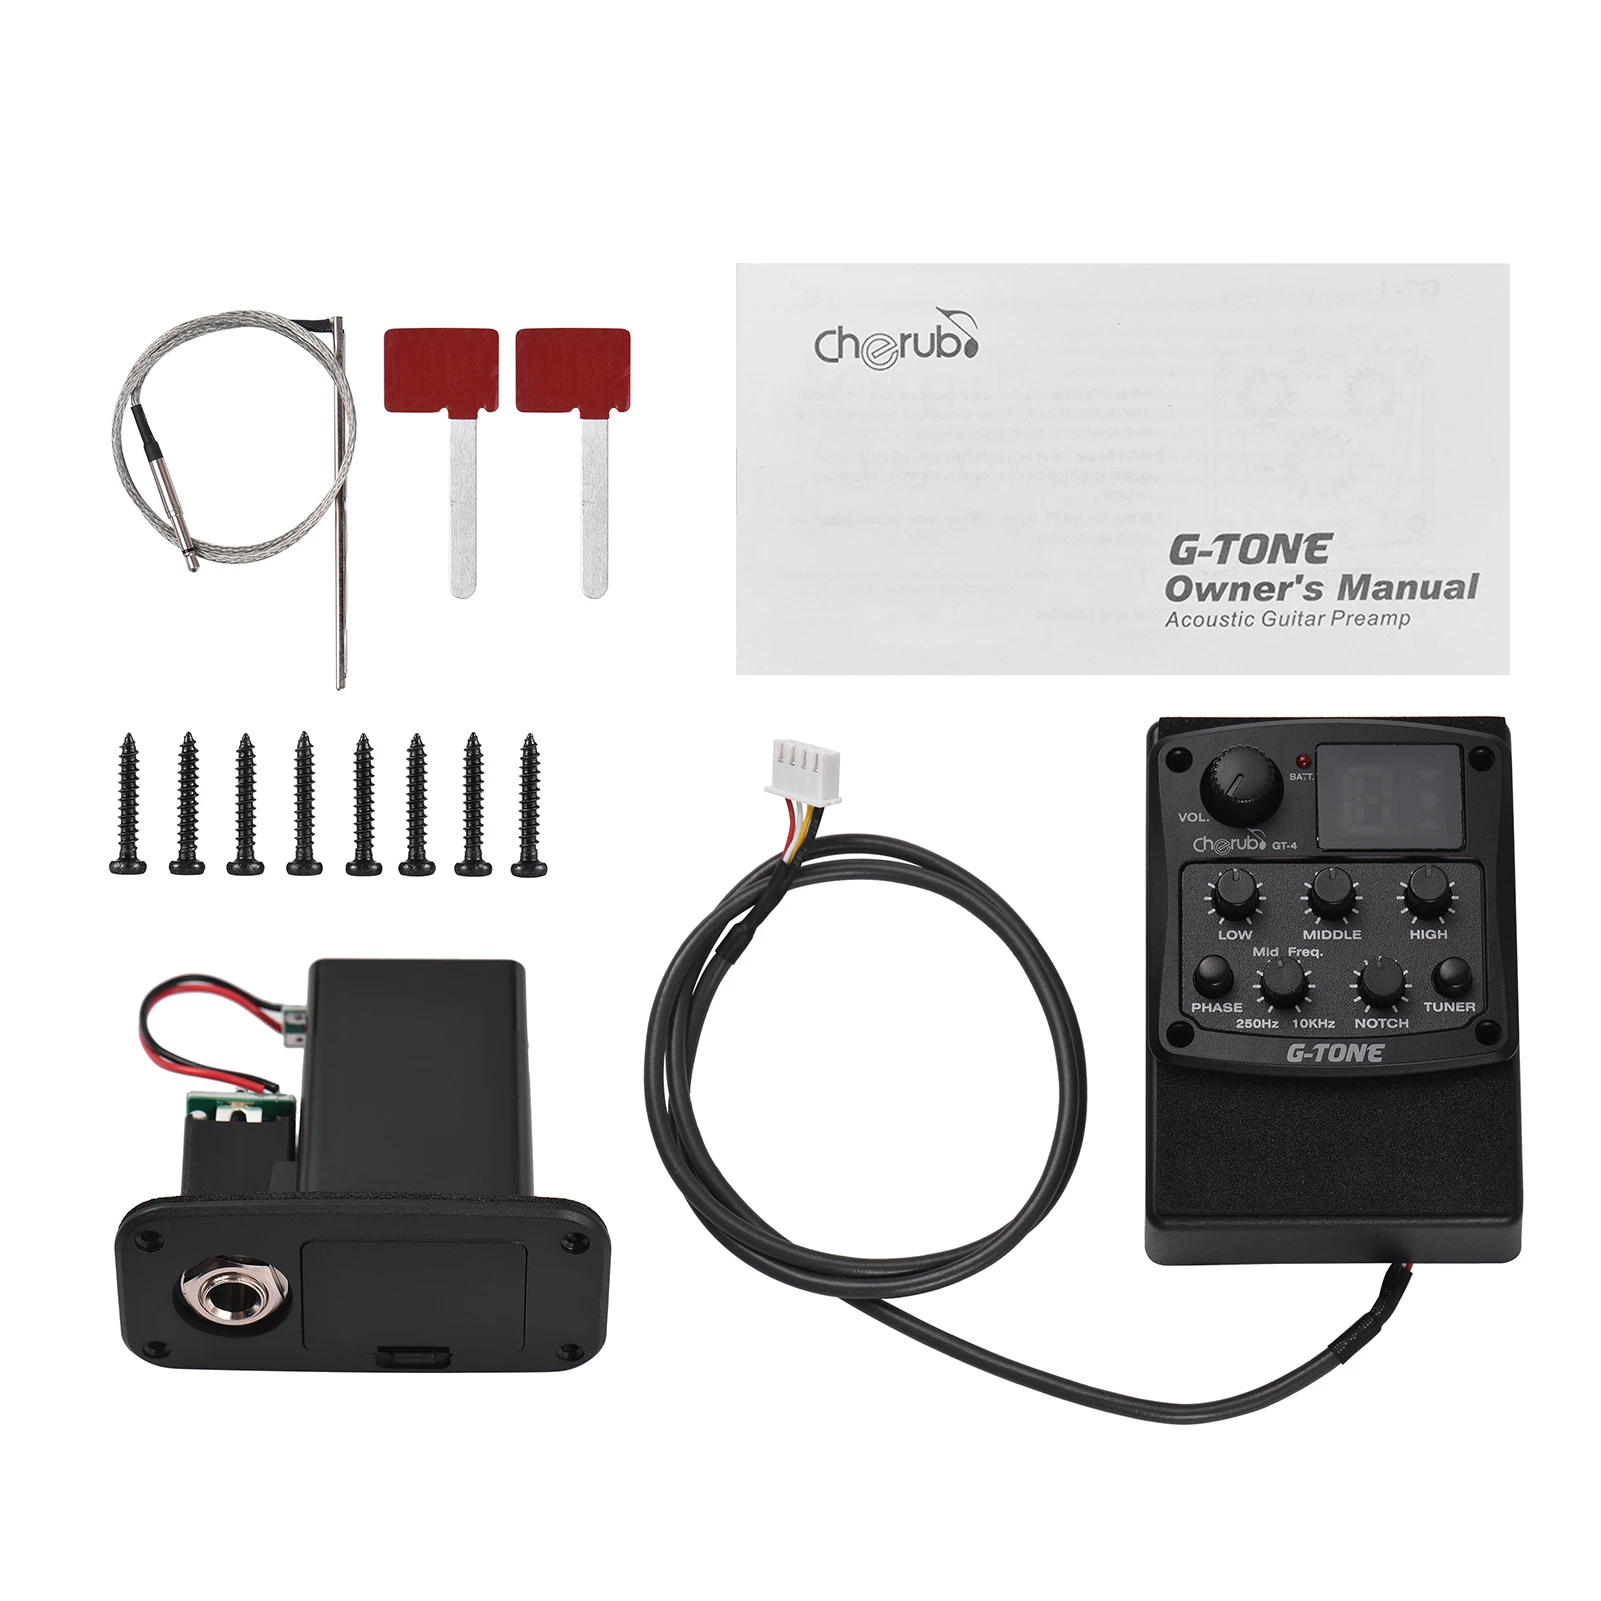 

Cherub GT-4 G-Tone 3-Band EQ Equalizer Acoustic Guitar Preamp Piezo Pickup LED Tuner Compact and lightweight